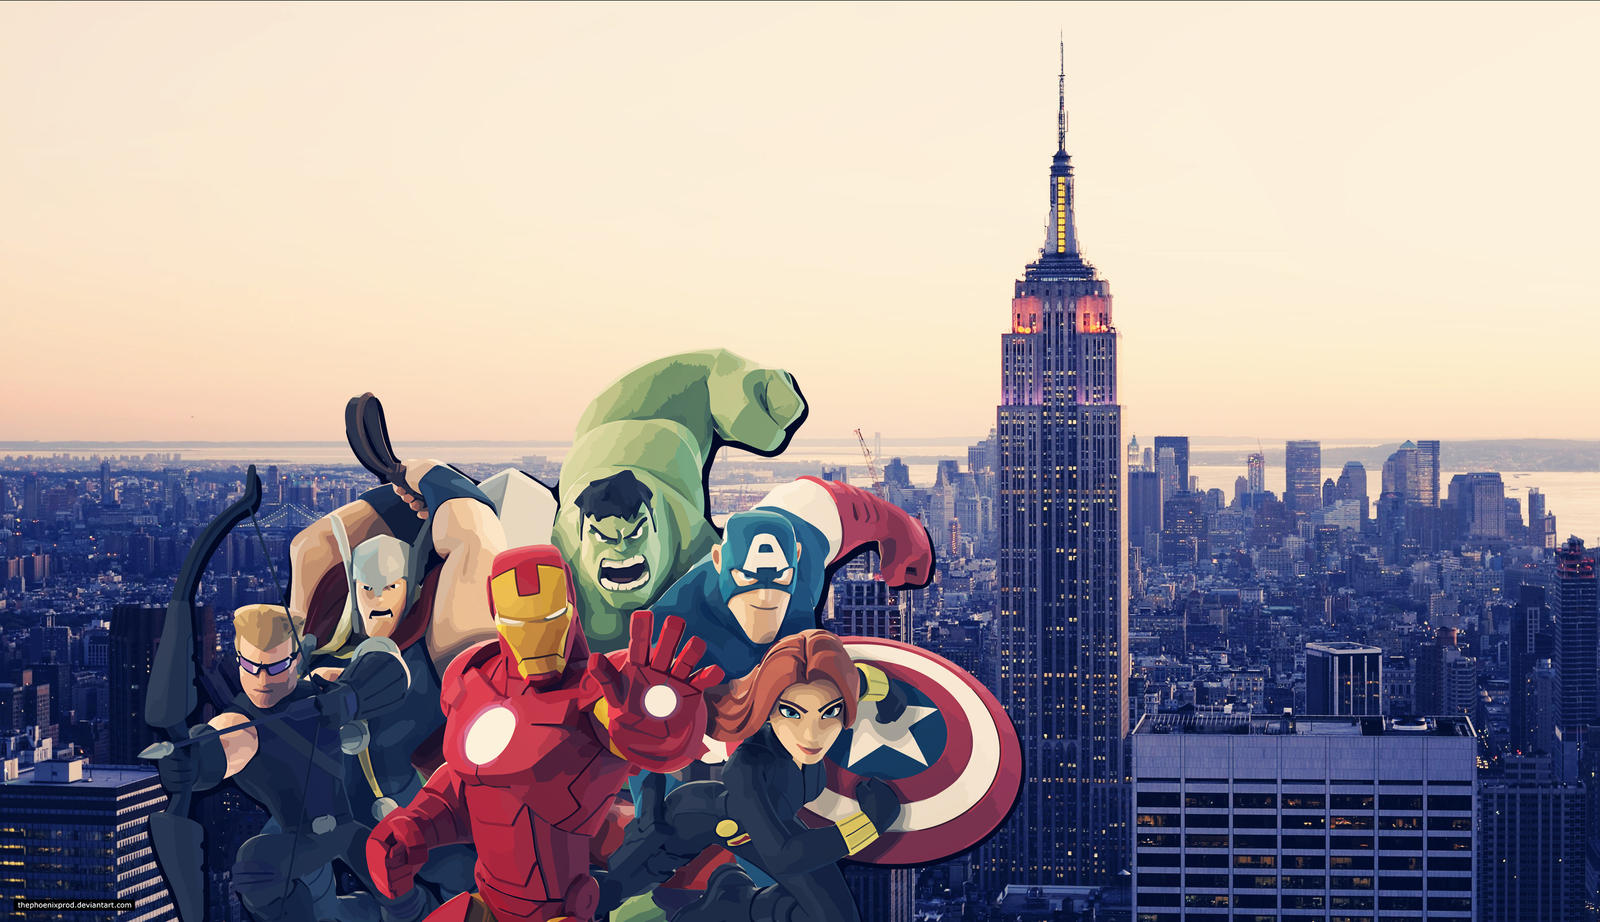 Funny Avengers Wallpapers